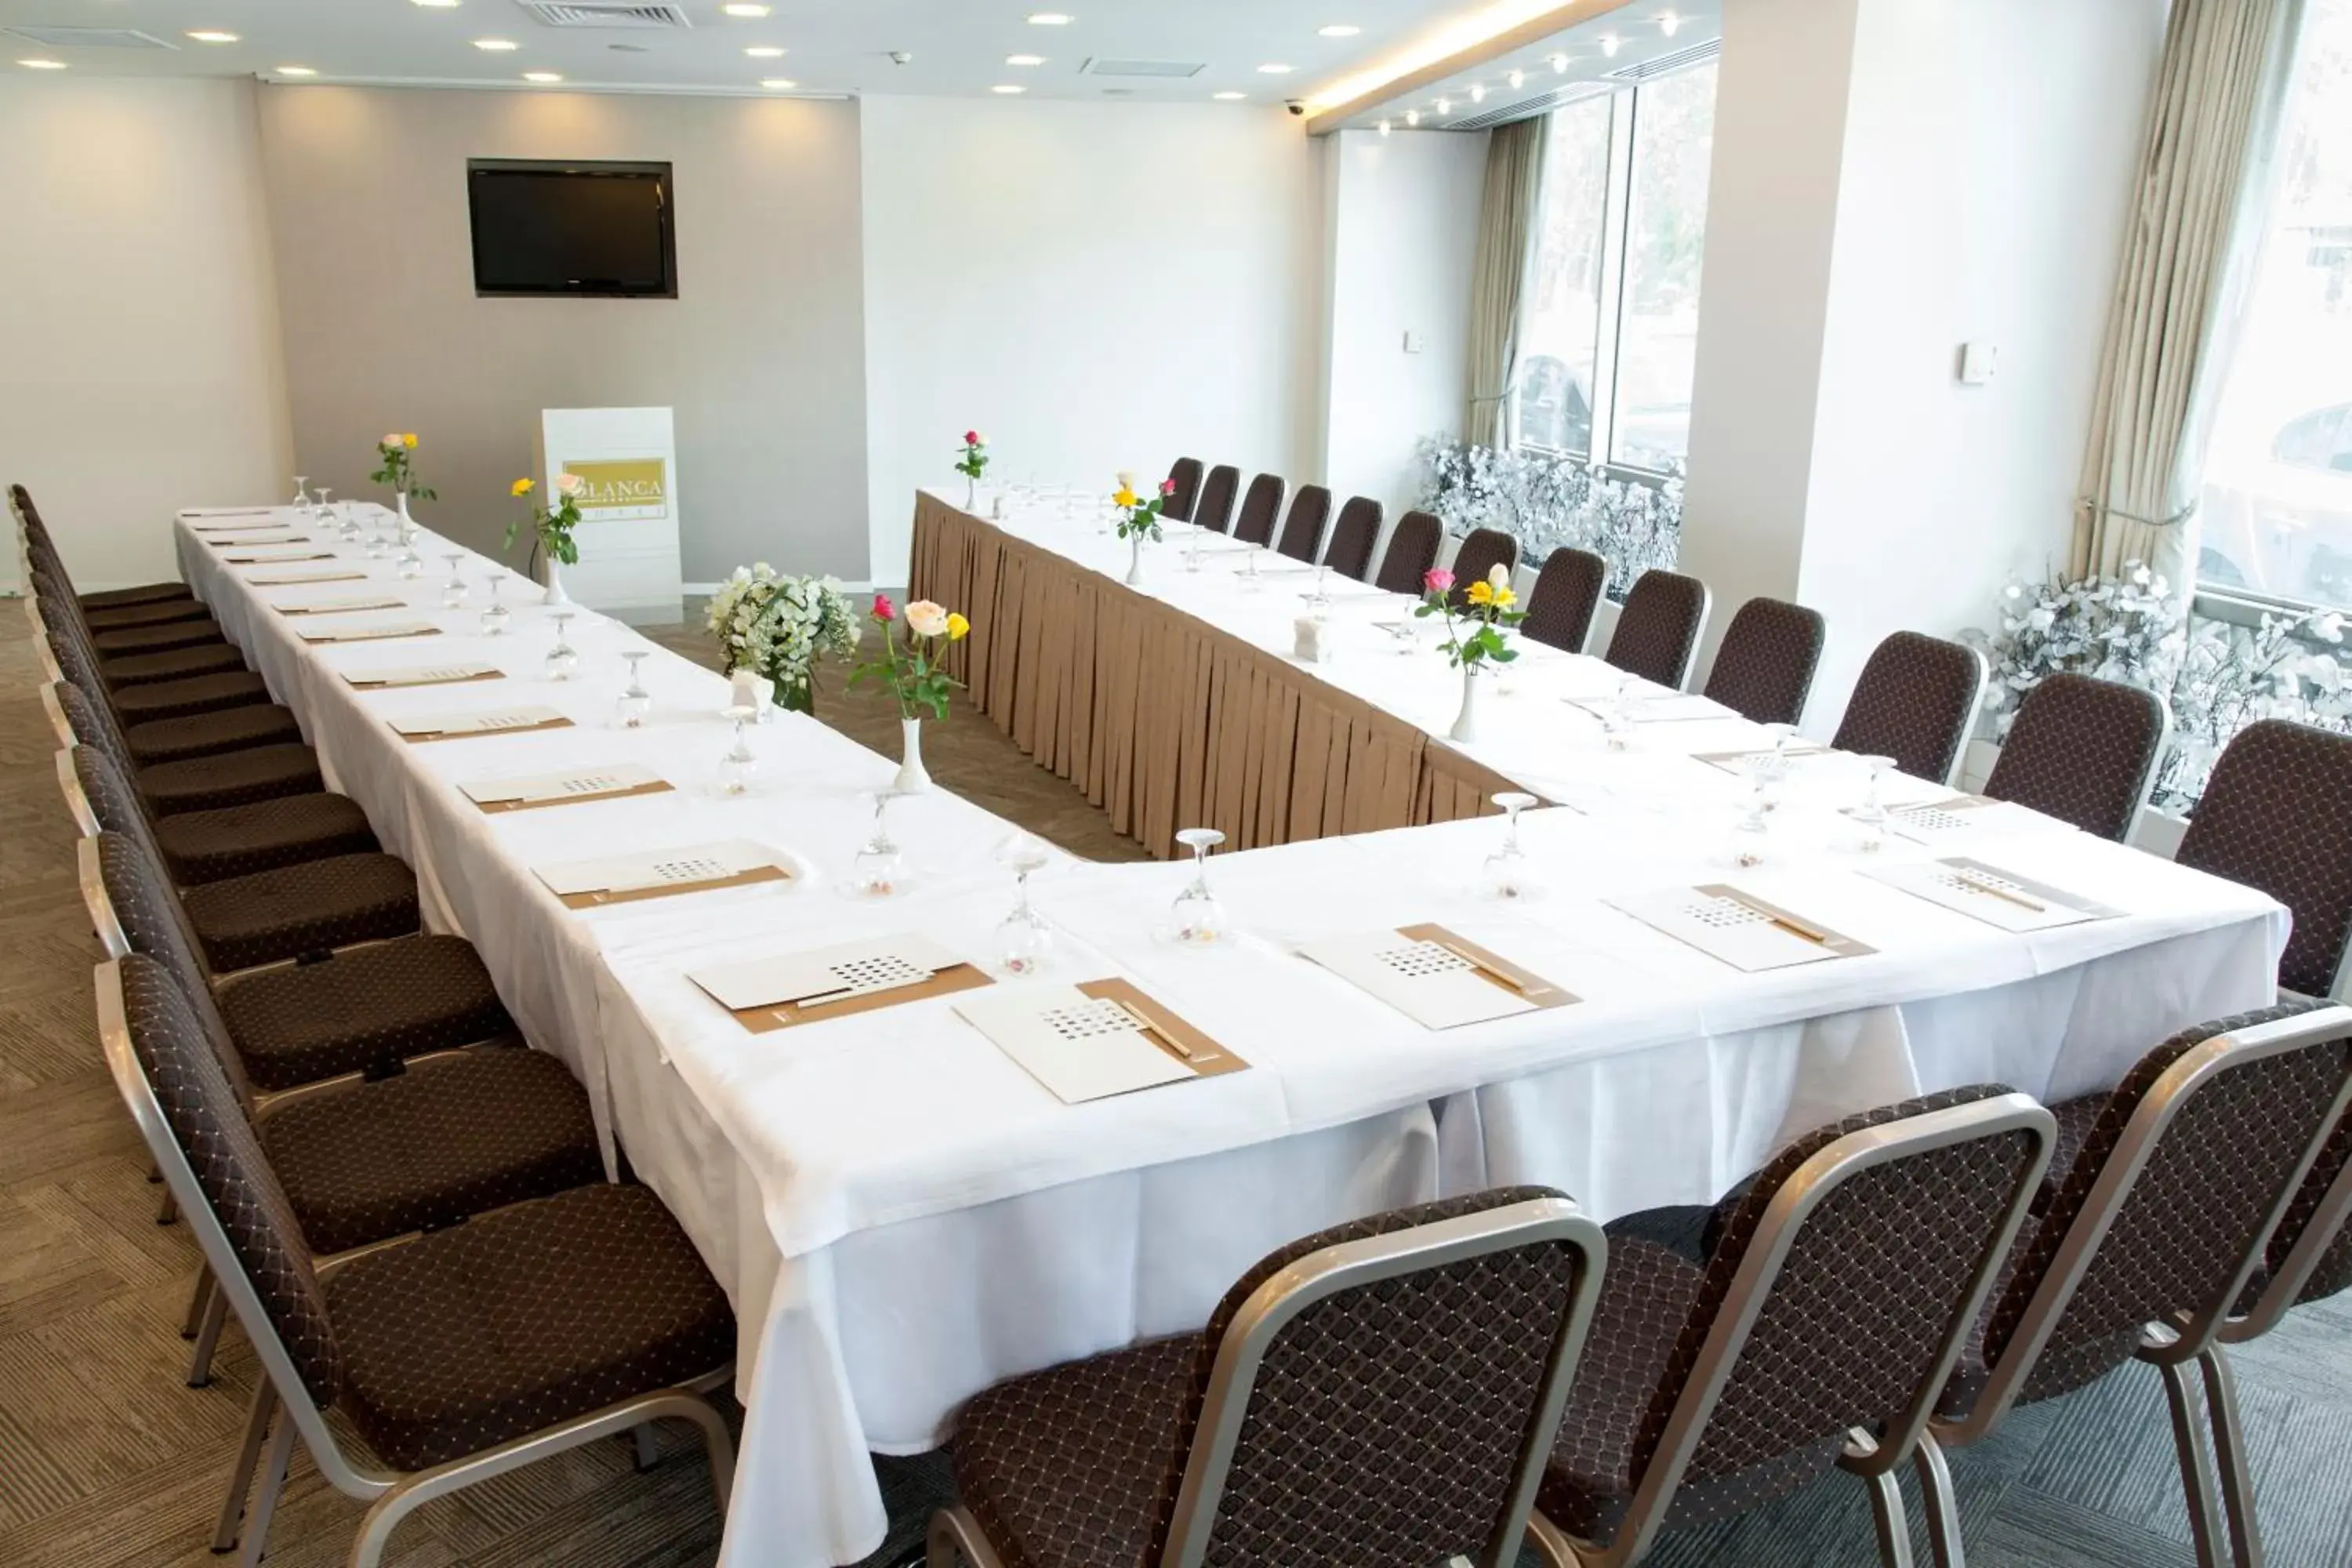 Business facilities in Blanca Hotel